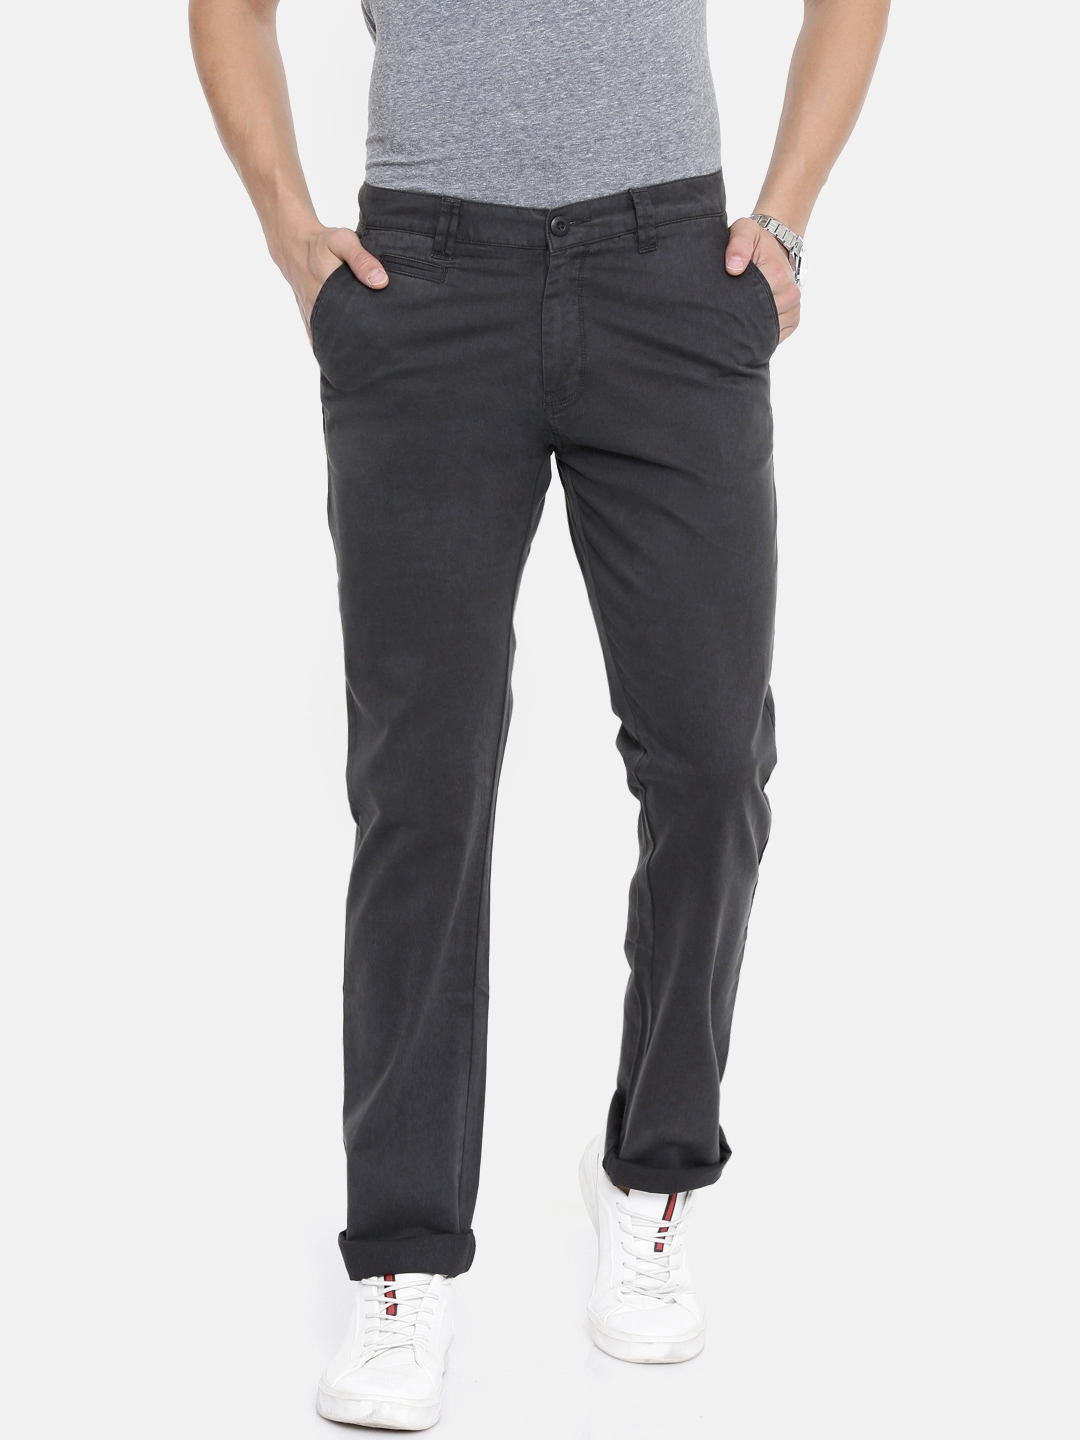 Buy Cotton Colors Men Charcoal Grey Slim Fit Solid Chinos - Trousers ...